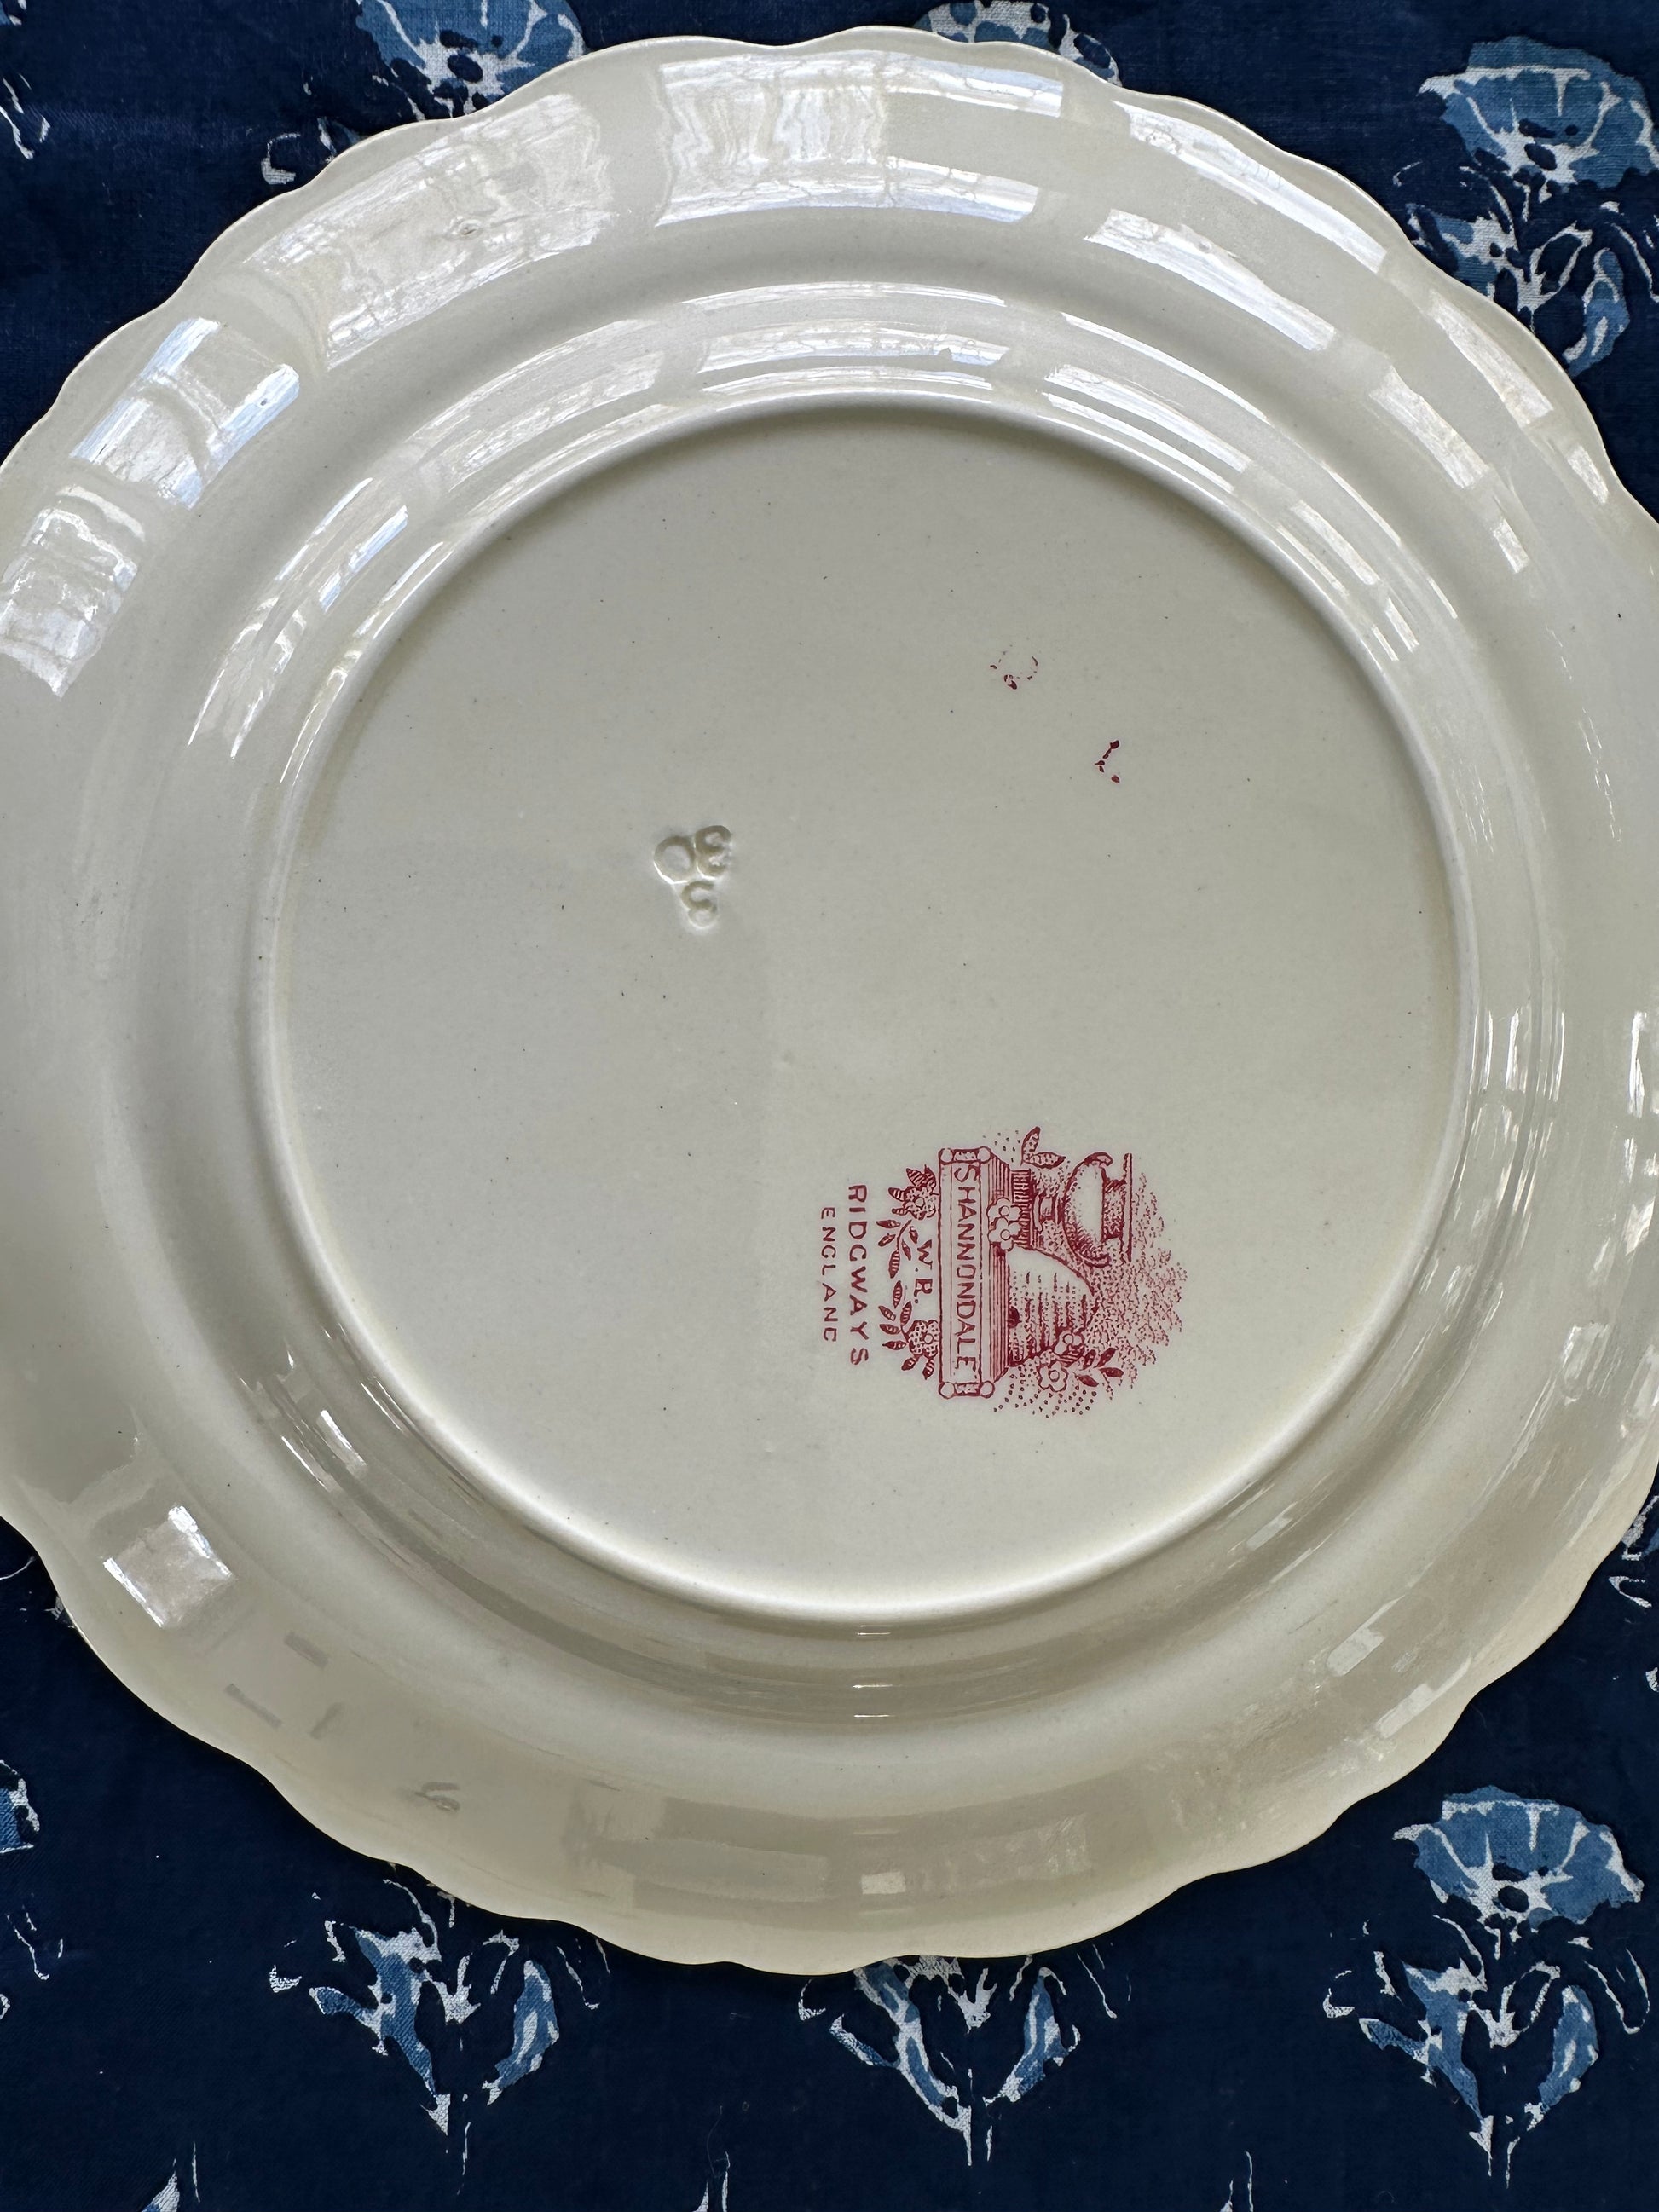 Set of 12 antique red and white transferware salad plates made by William Ridgway in 1830's - DharBazaar